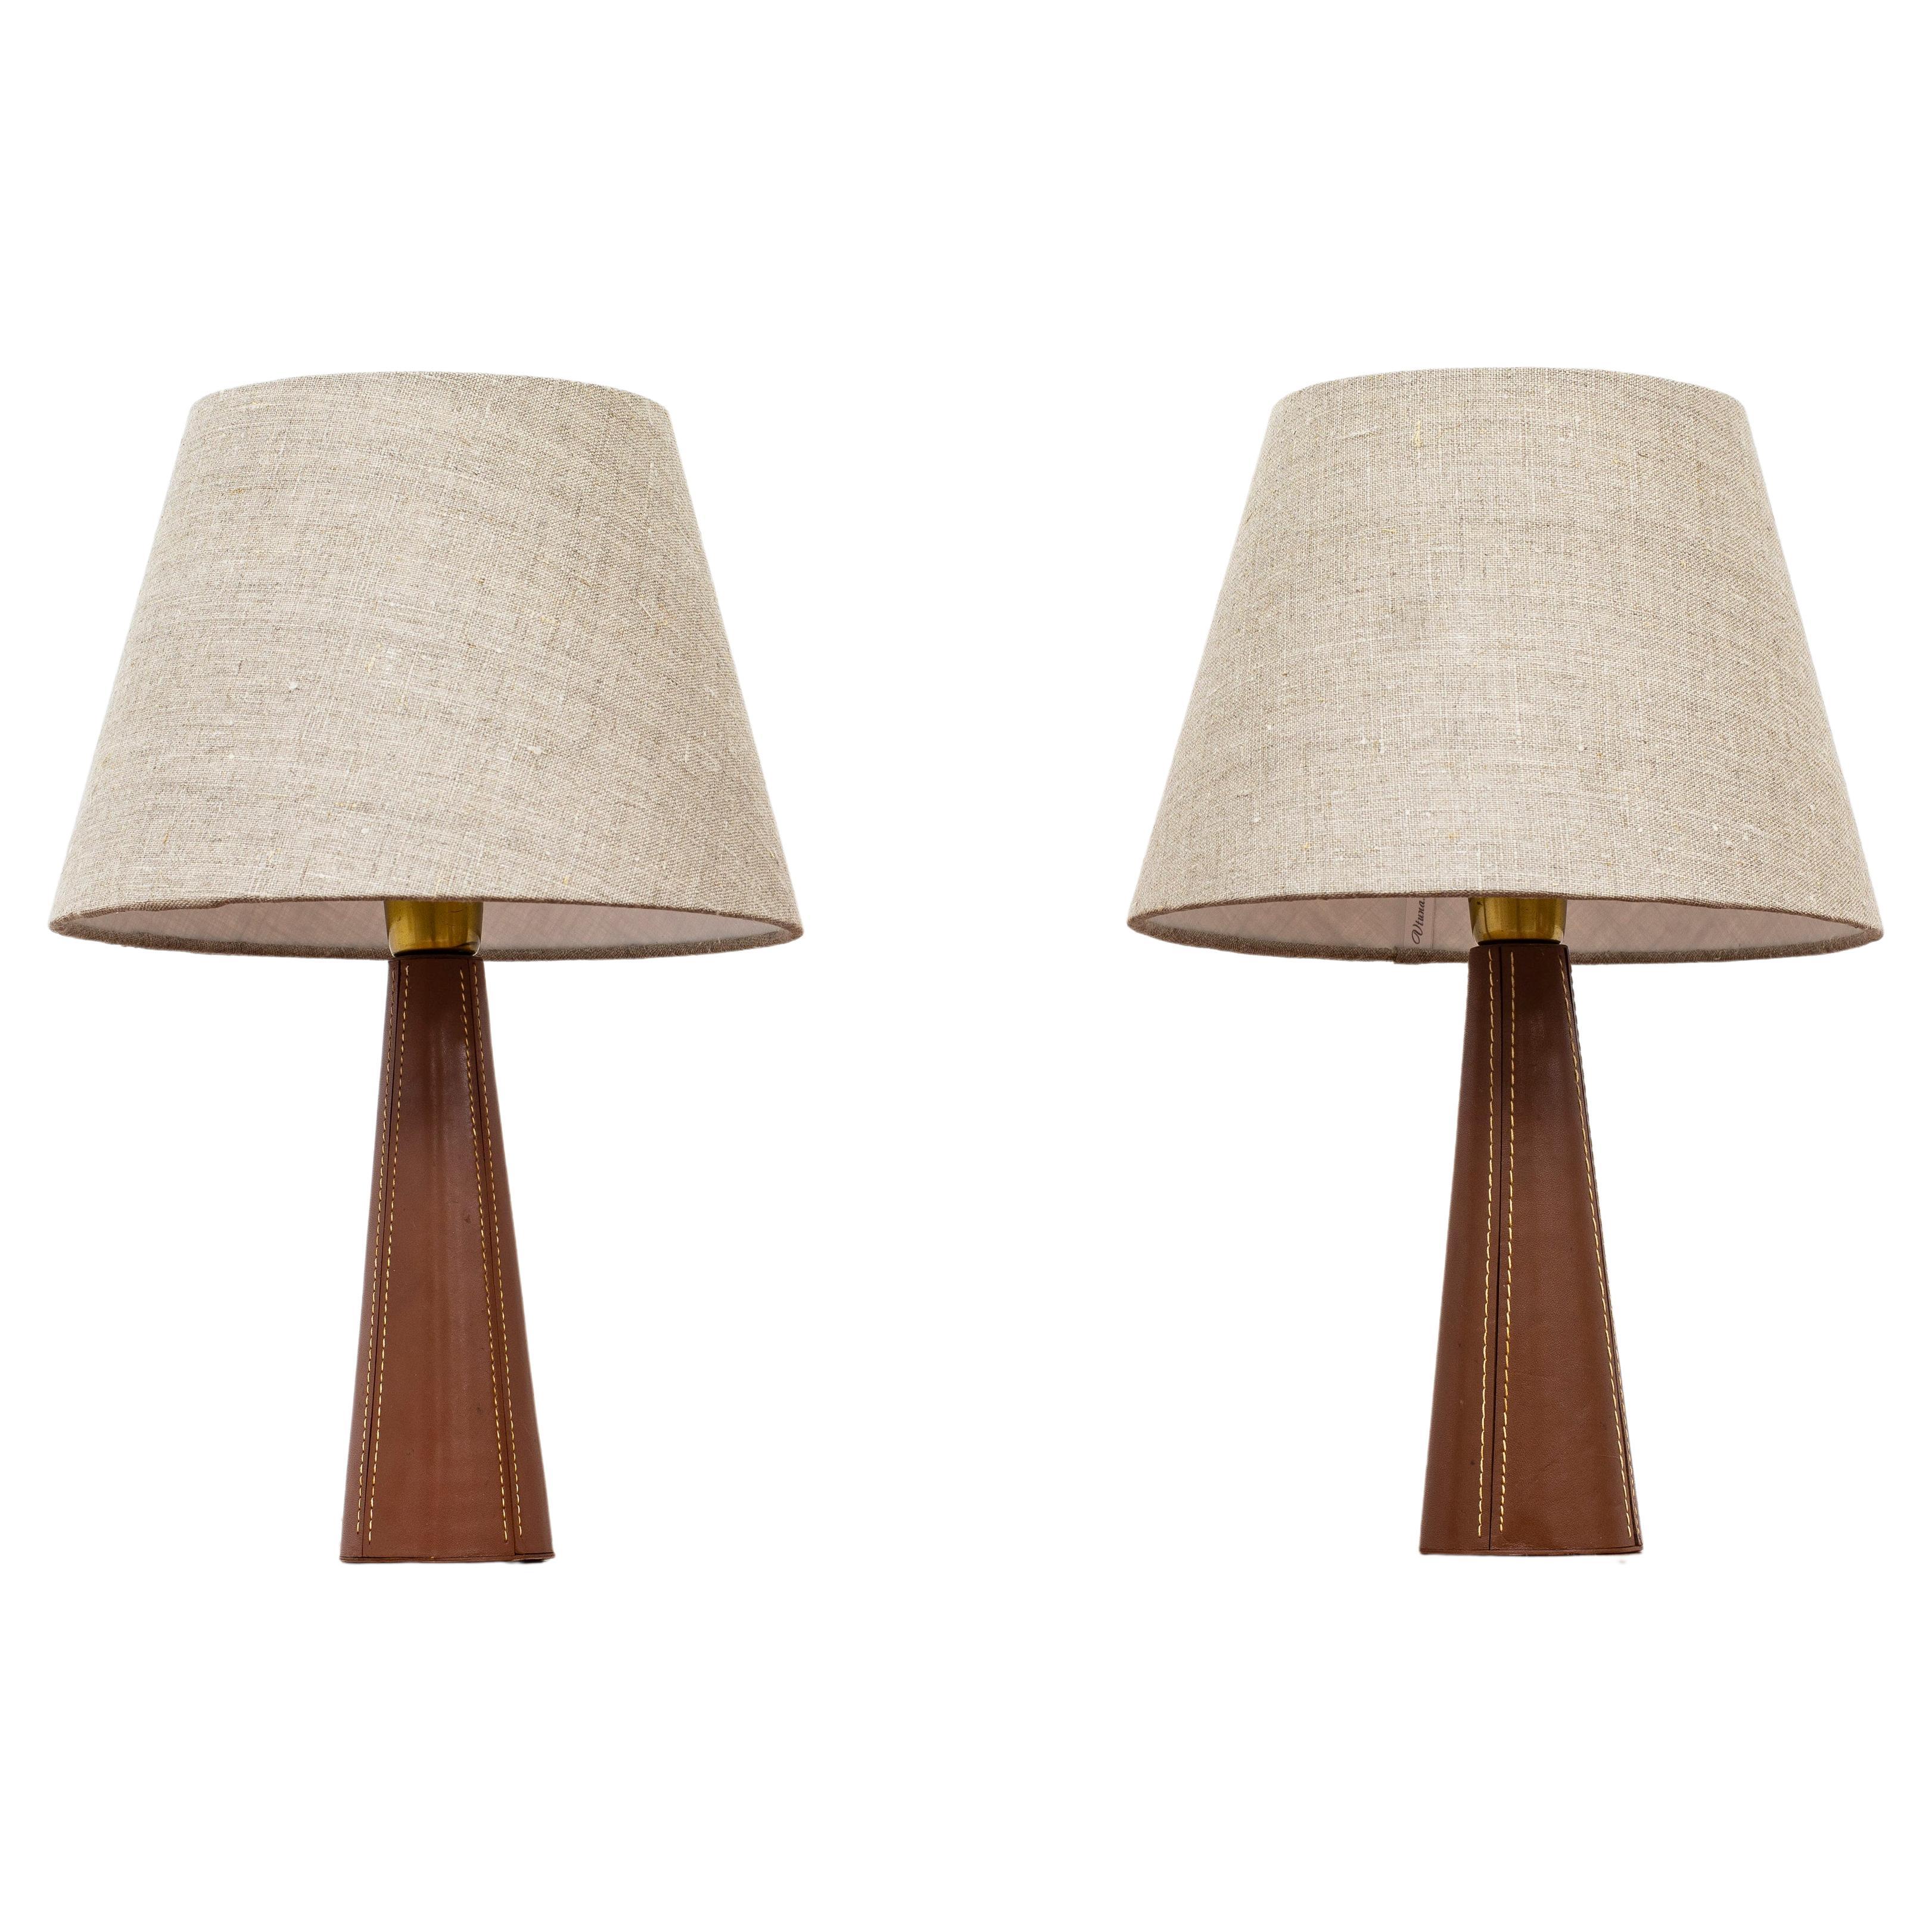 Pair of Leather Table Lamps in the Style of Lisa Johansson Pape, Scandinavian